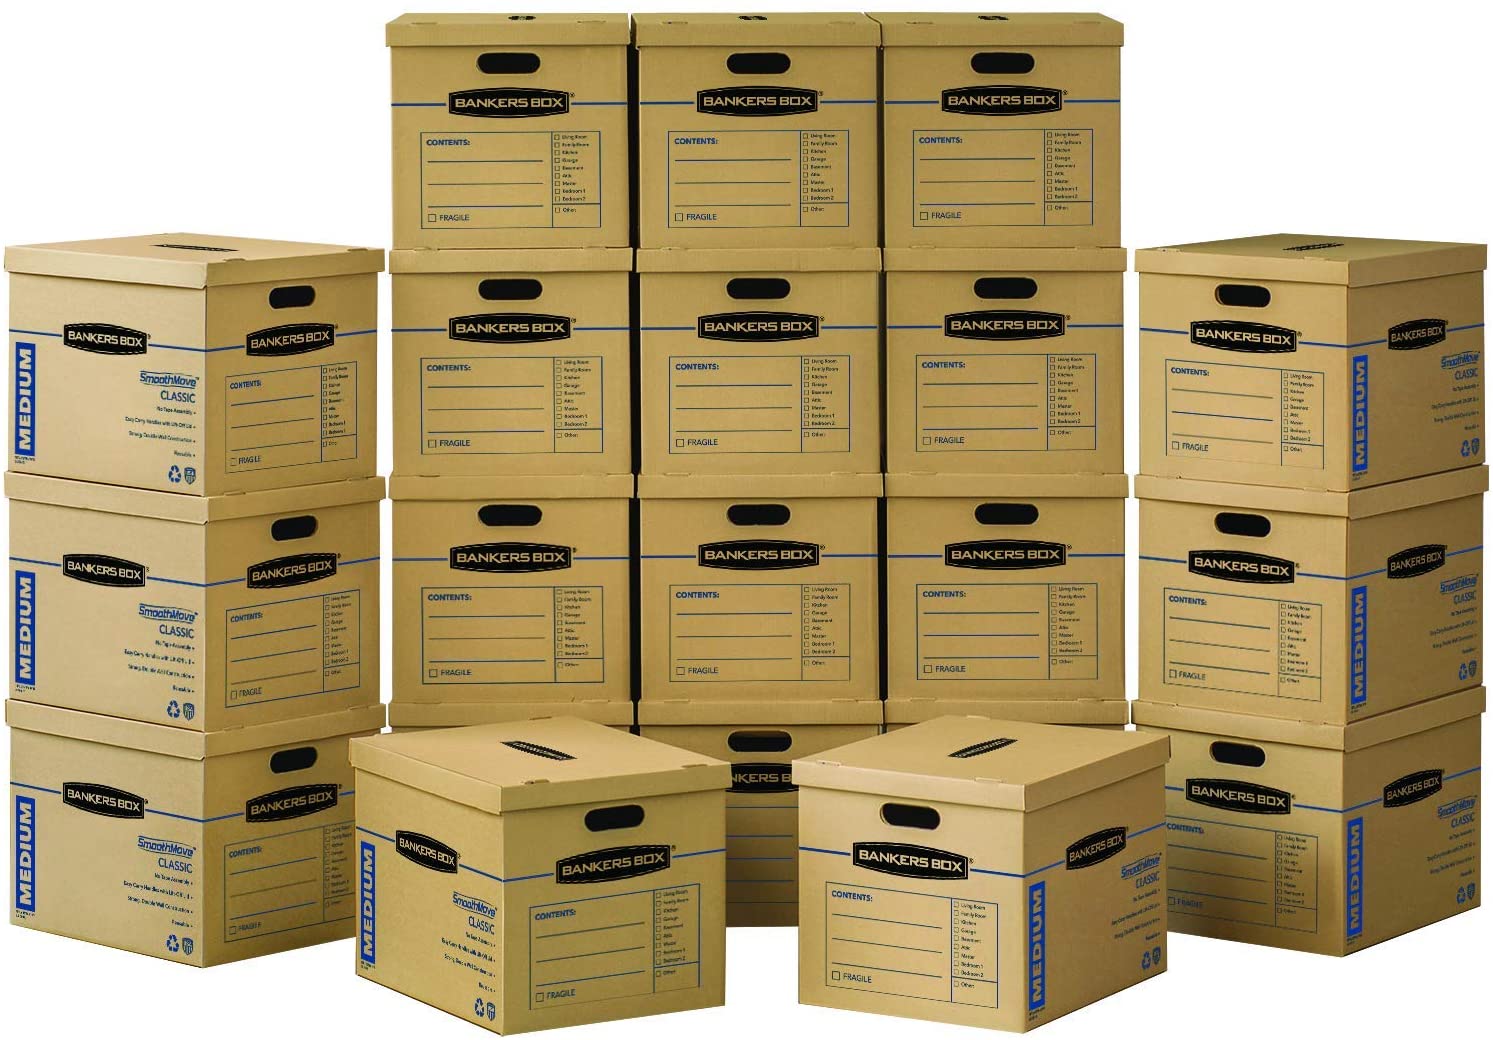 Bankers Box Classic Lidded Cardboard Book Storage Boxes, 20-Pack